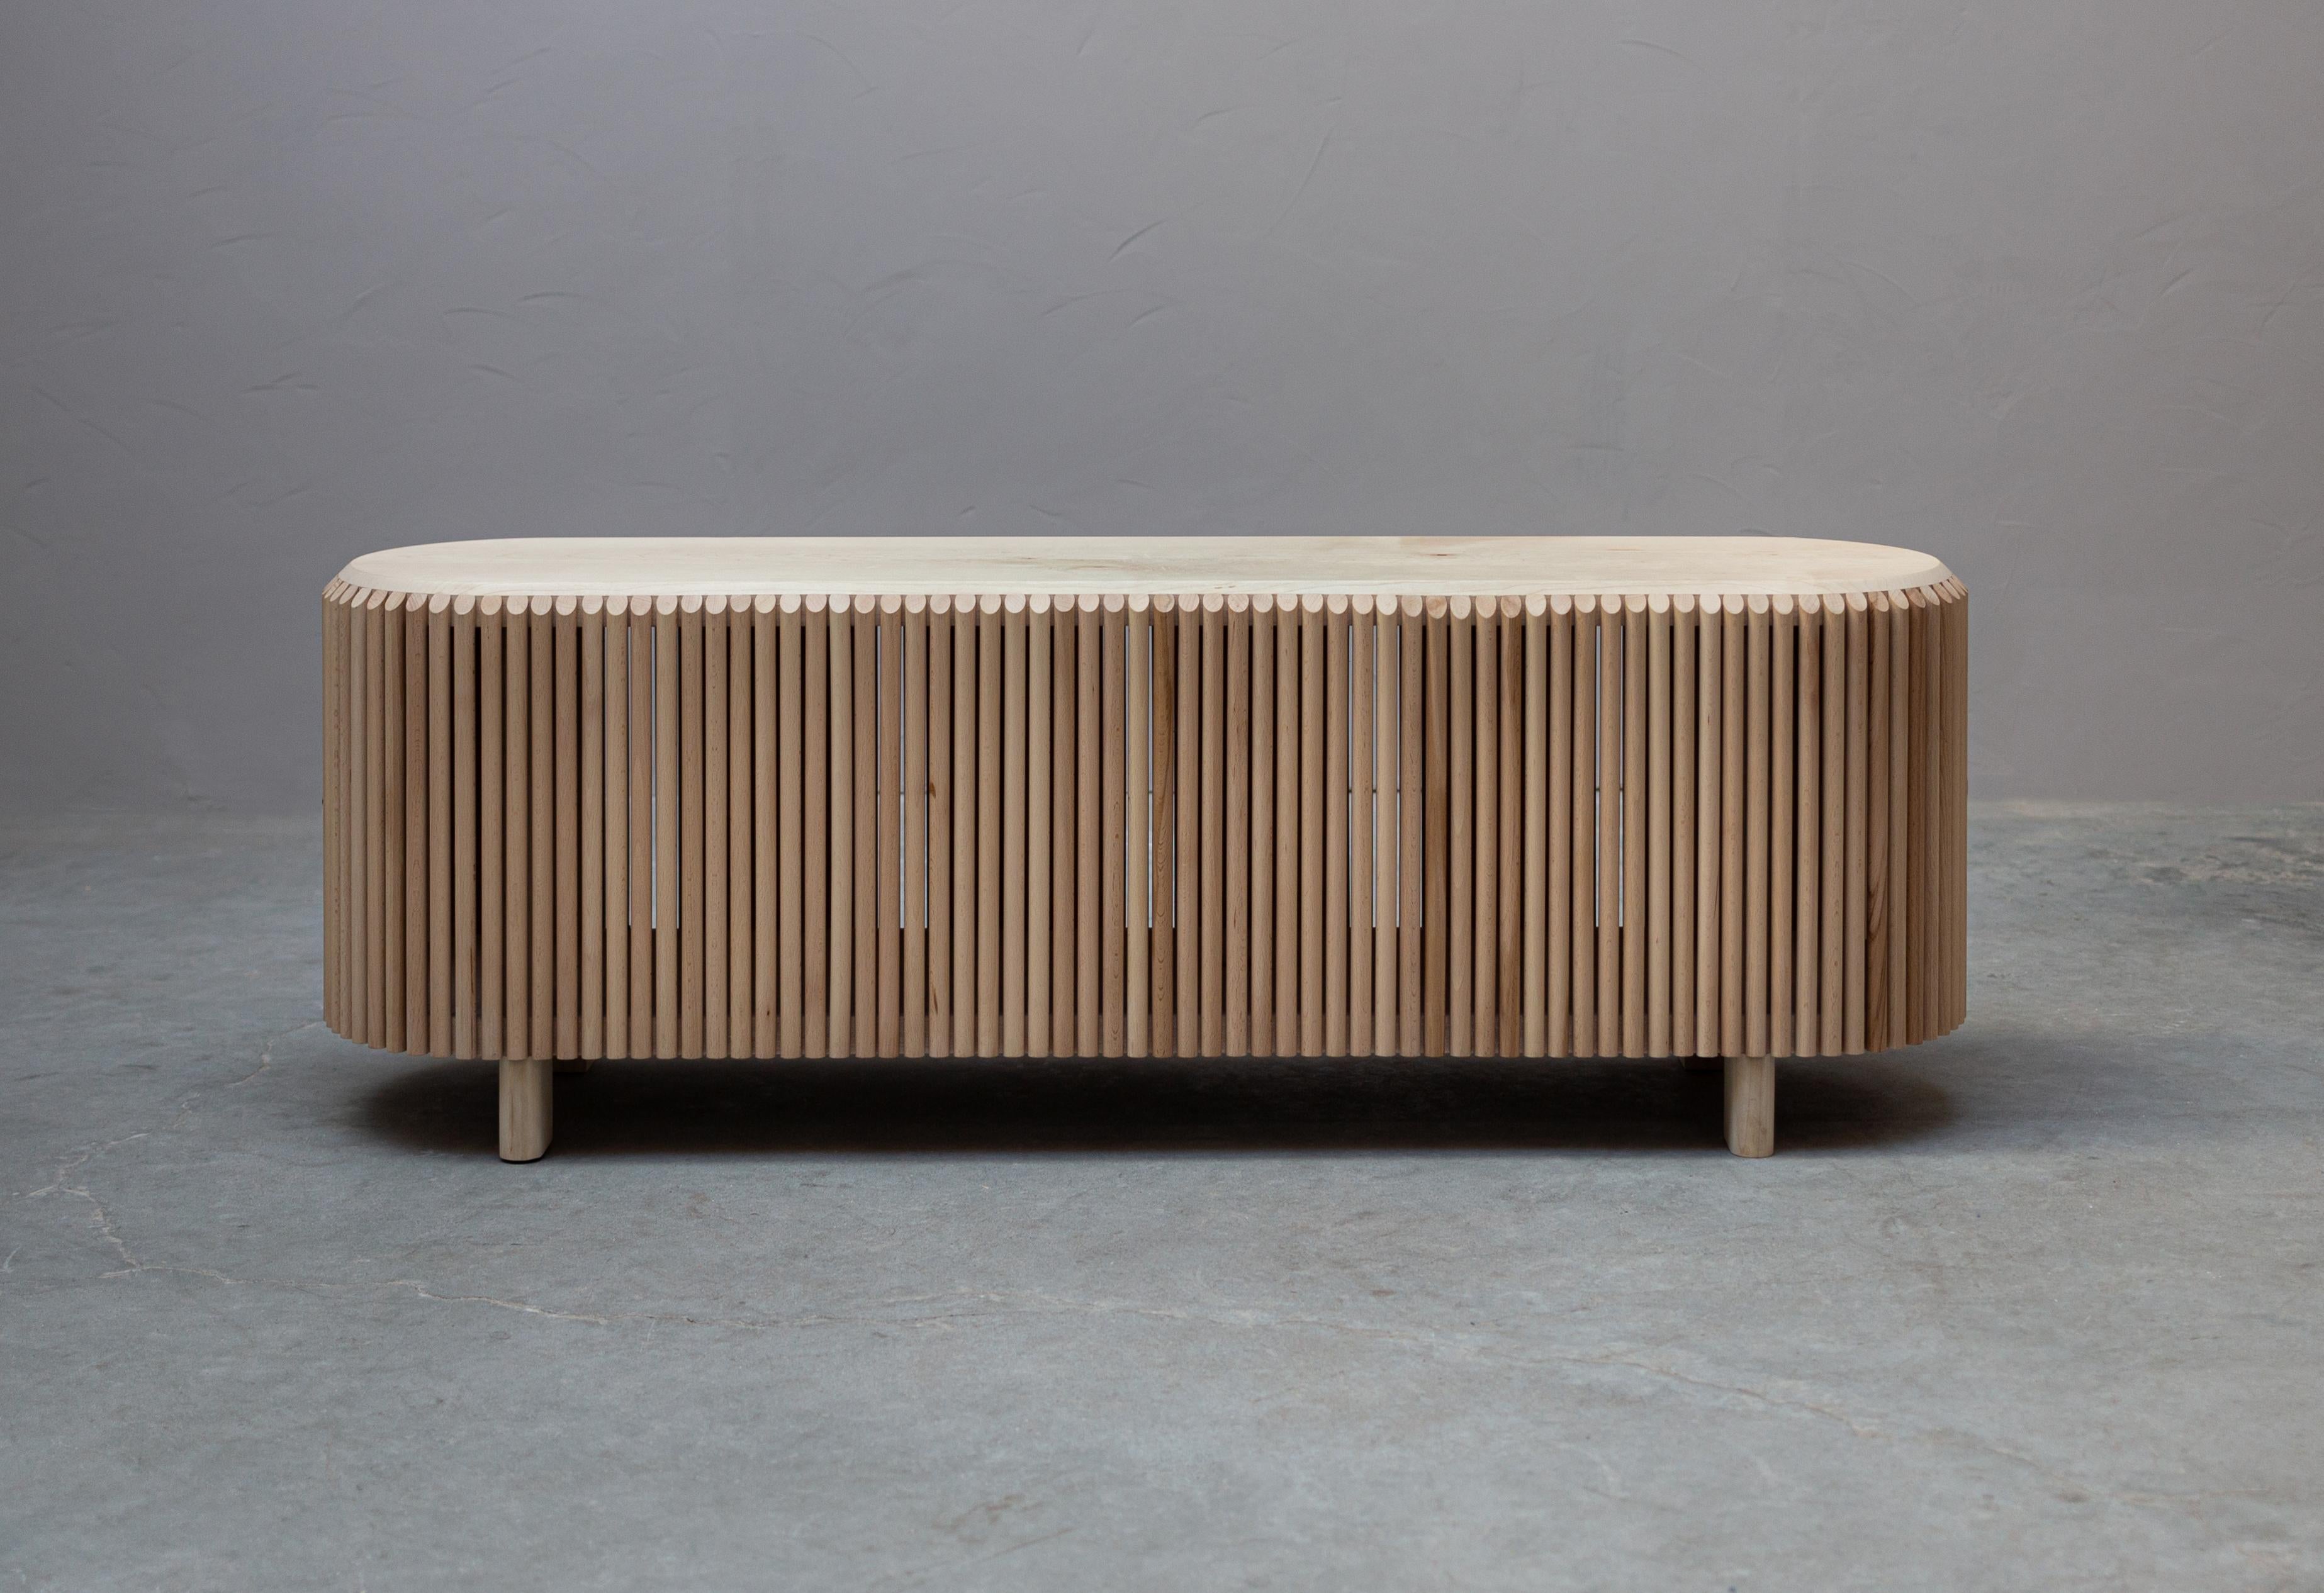 Roseaux bench by Alexandre Labruyère
Dimensions: W 136 x D 36 x H 45 cm
Materials: Sycamore, beech / natural oil protection.

Like a curtain of reeds, the rhythm created by the beech stems lets the light filter through and softens the rhythmic